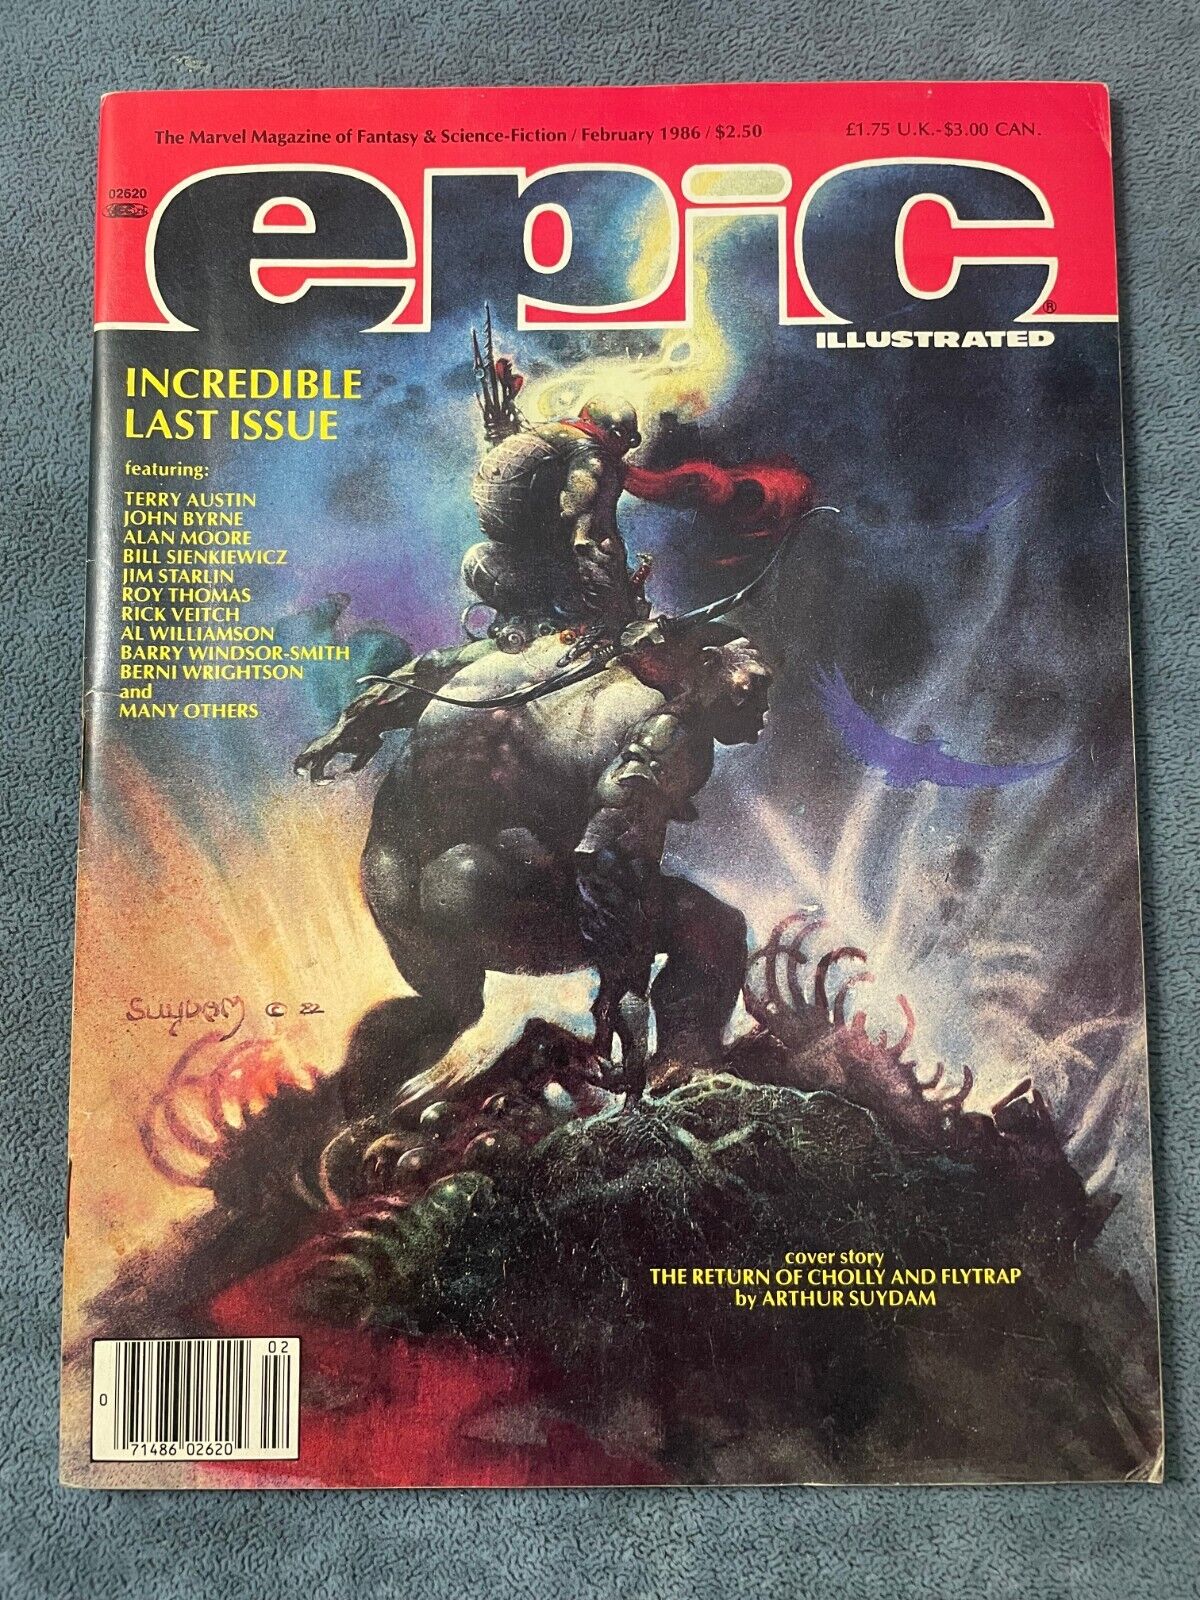 Epic Illustrated #34 1986 Marvel Magazine Stan Lee Goodwin Final Issue FN/VF